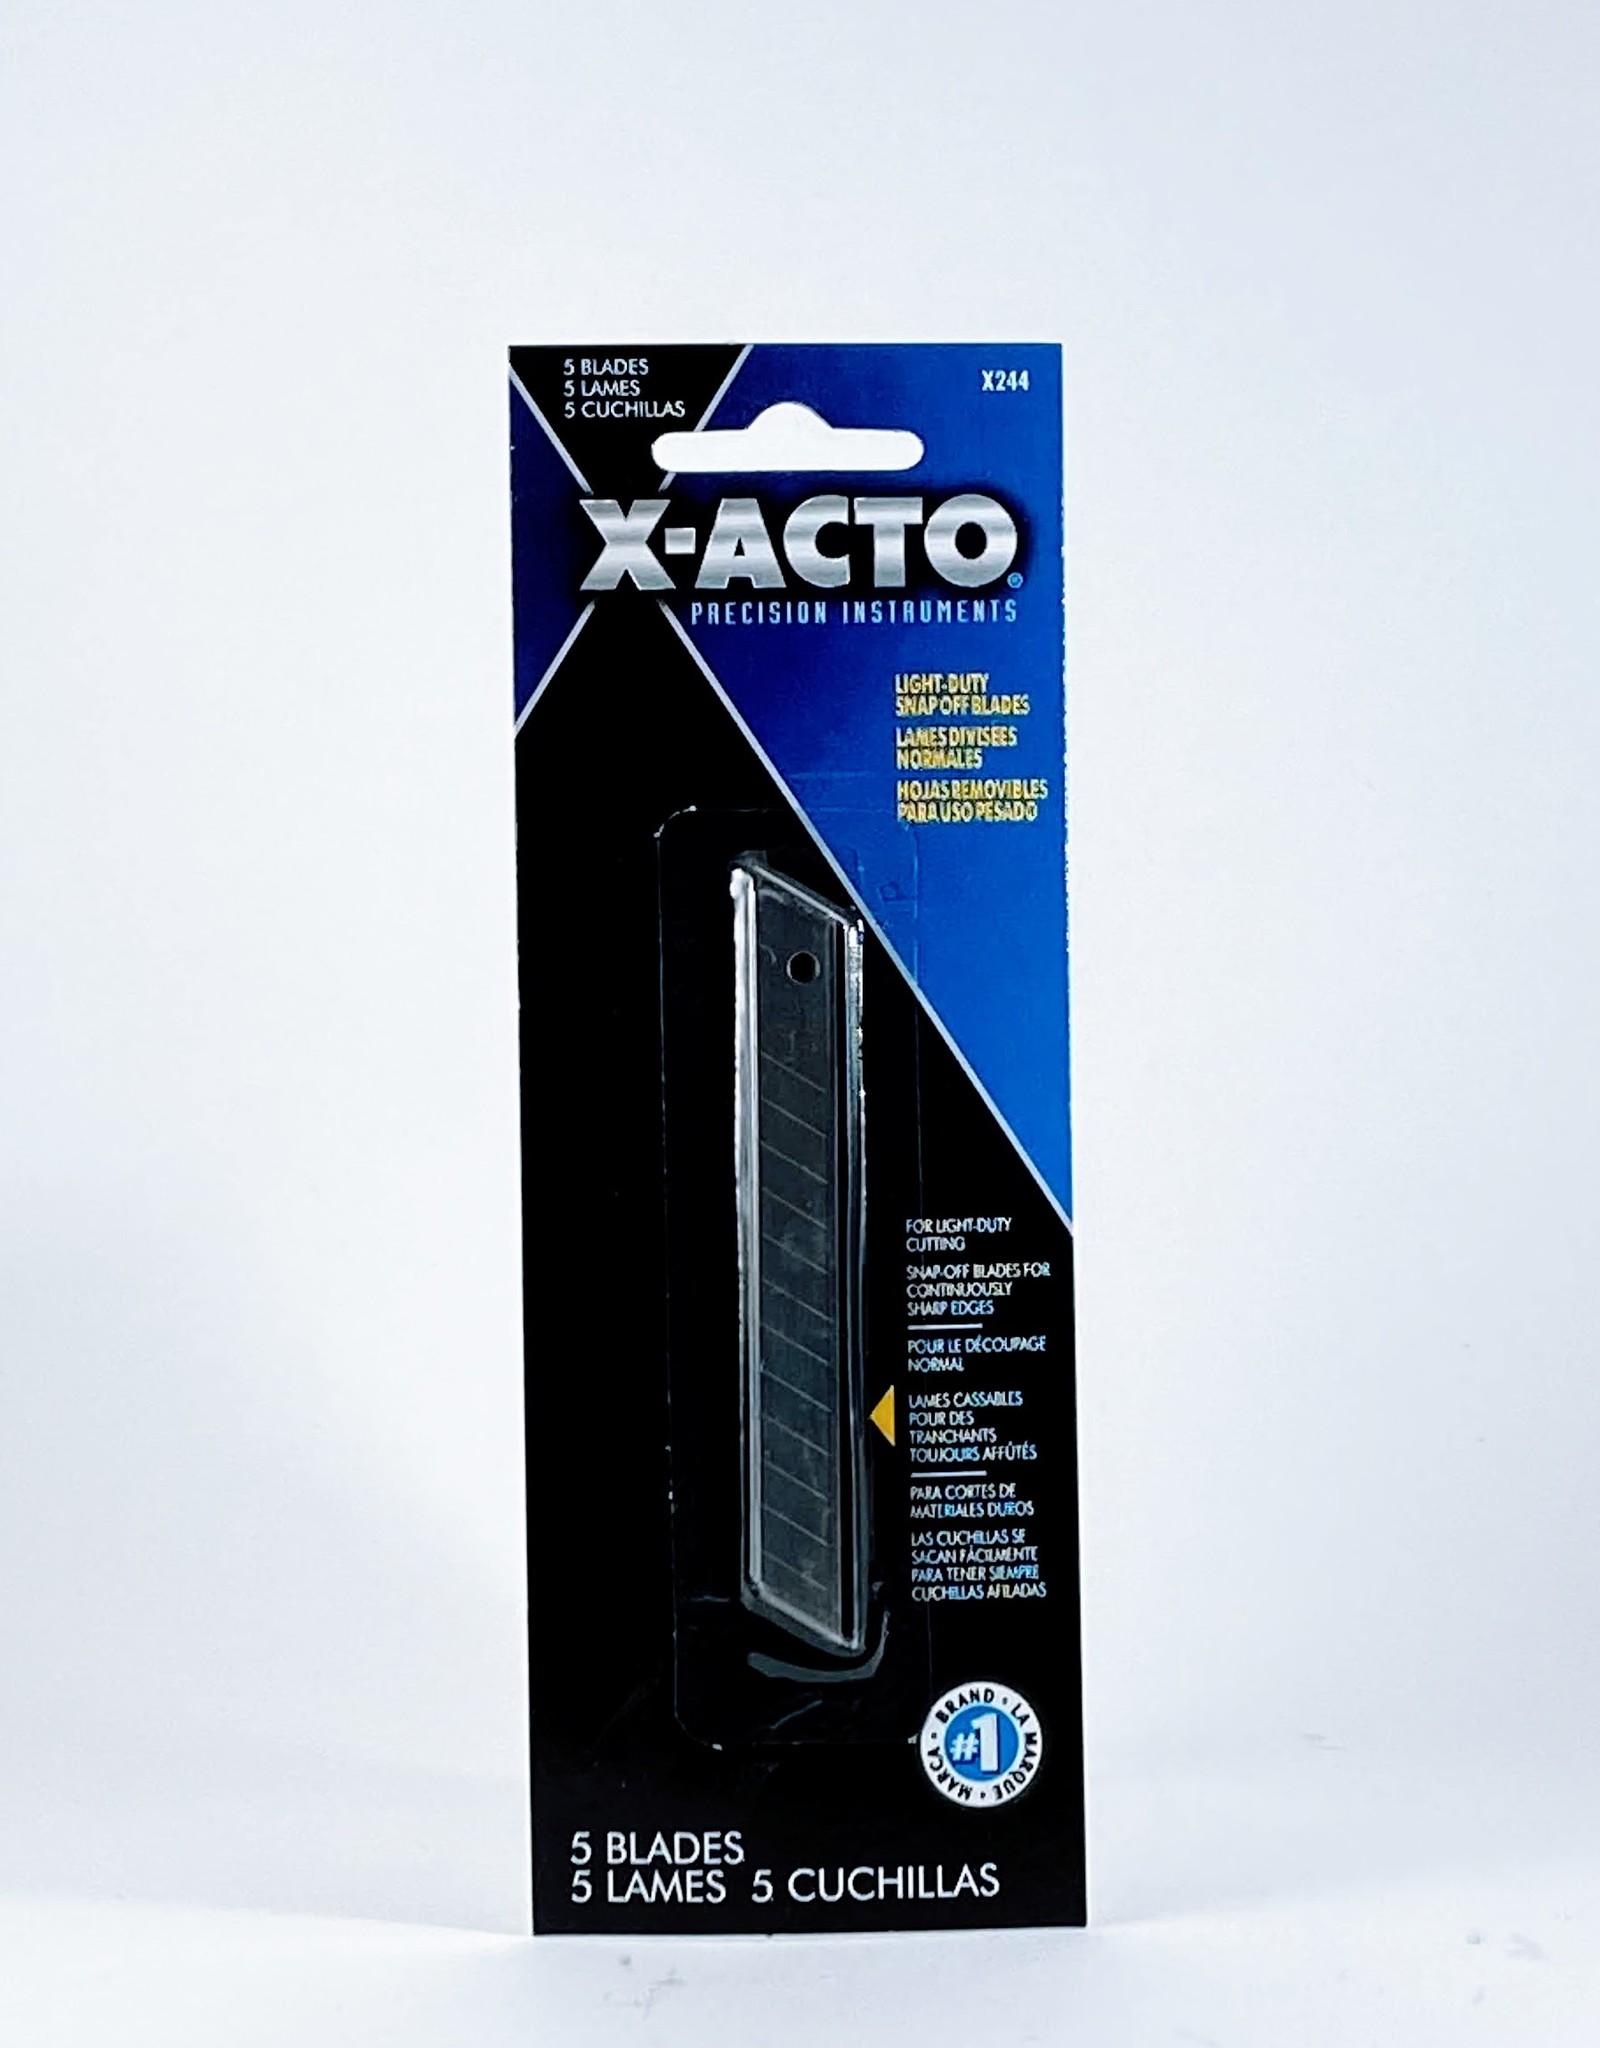 X-Acto Knife with Blades – The Imagination Toolbox